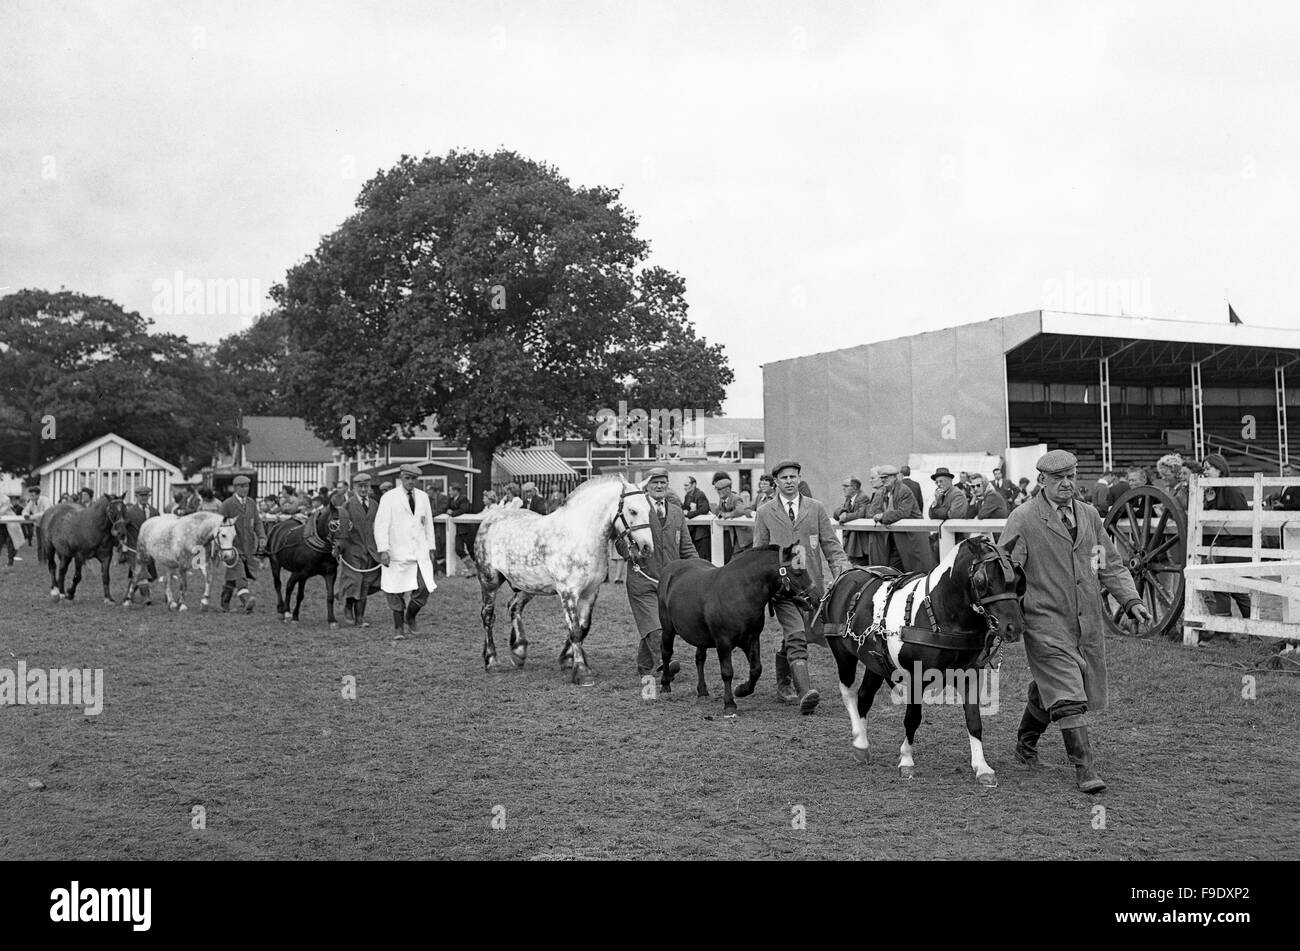 Parading horses at The Royal Agricultural Show in Stoneleigh 1963 Stock Photo